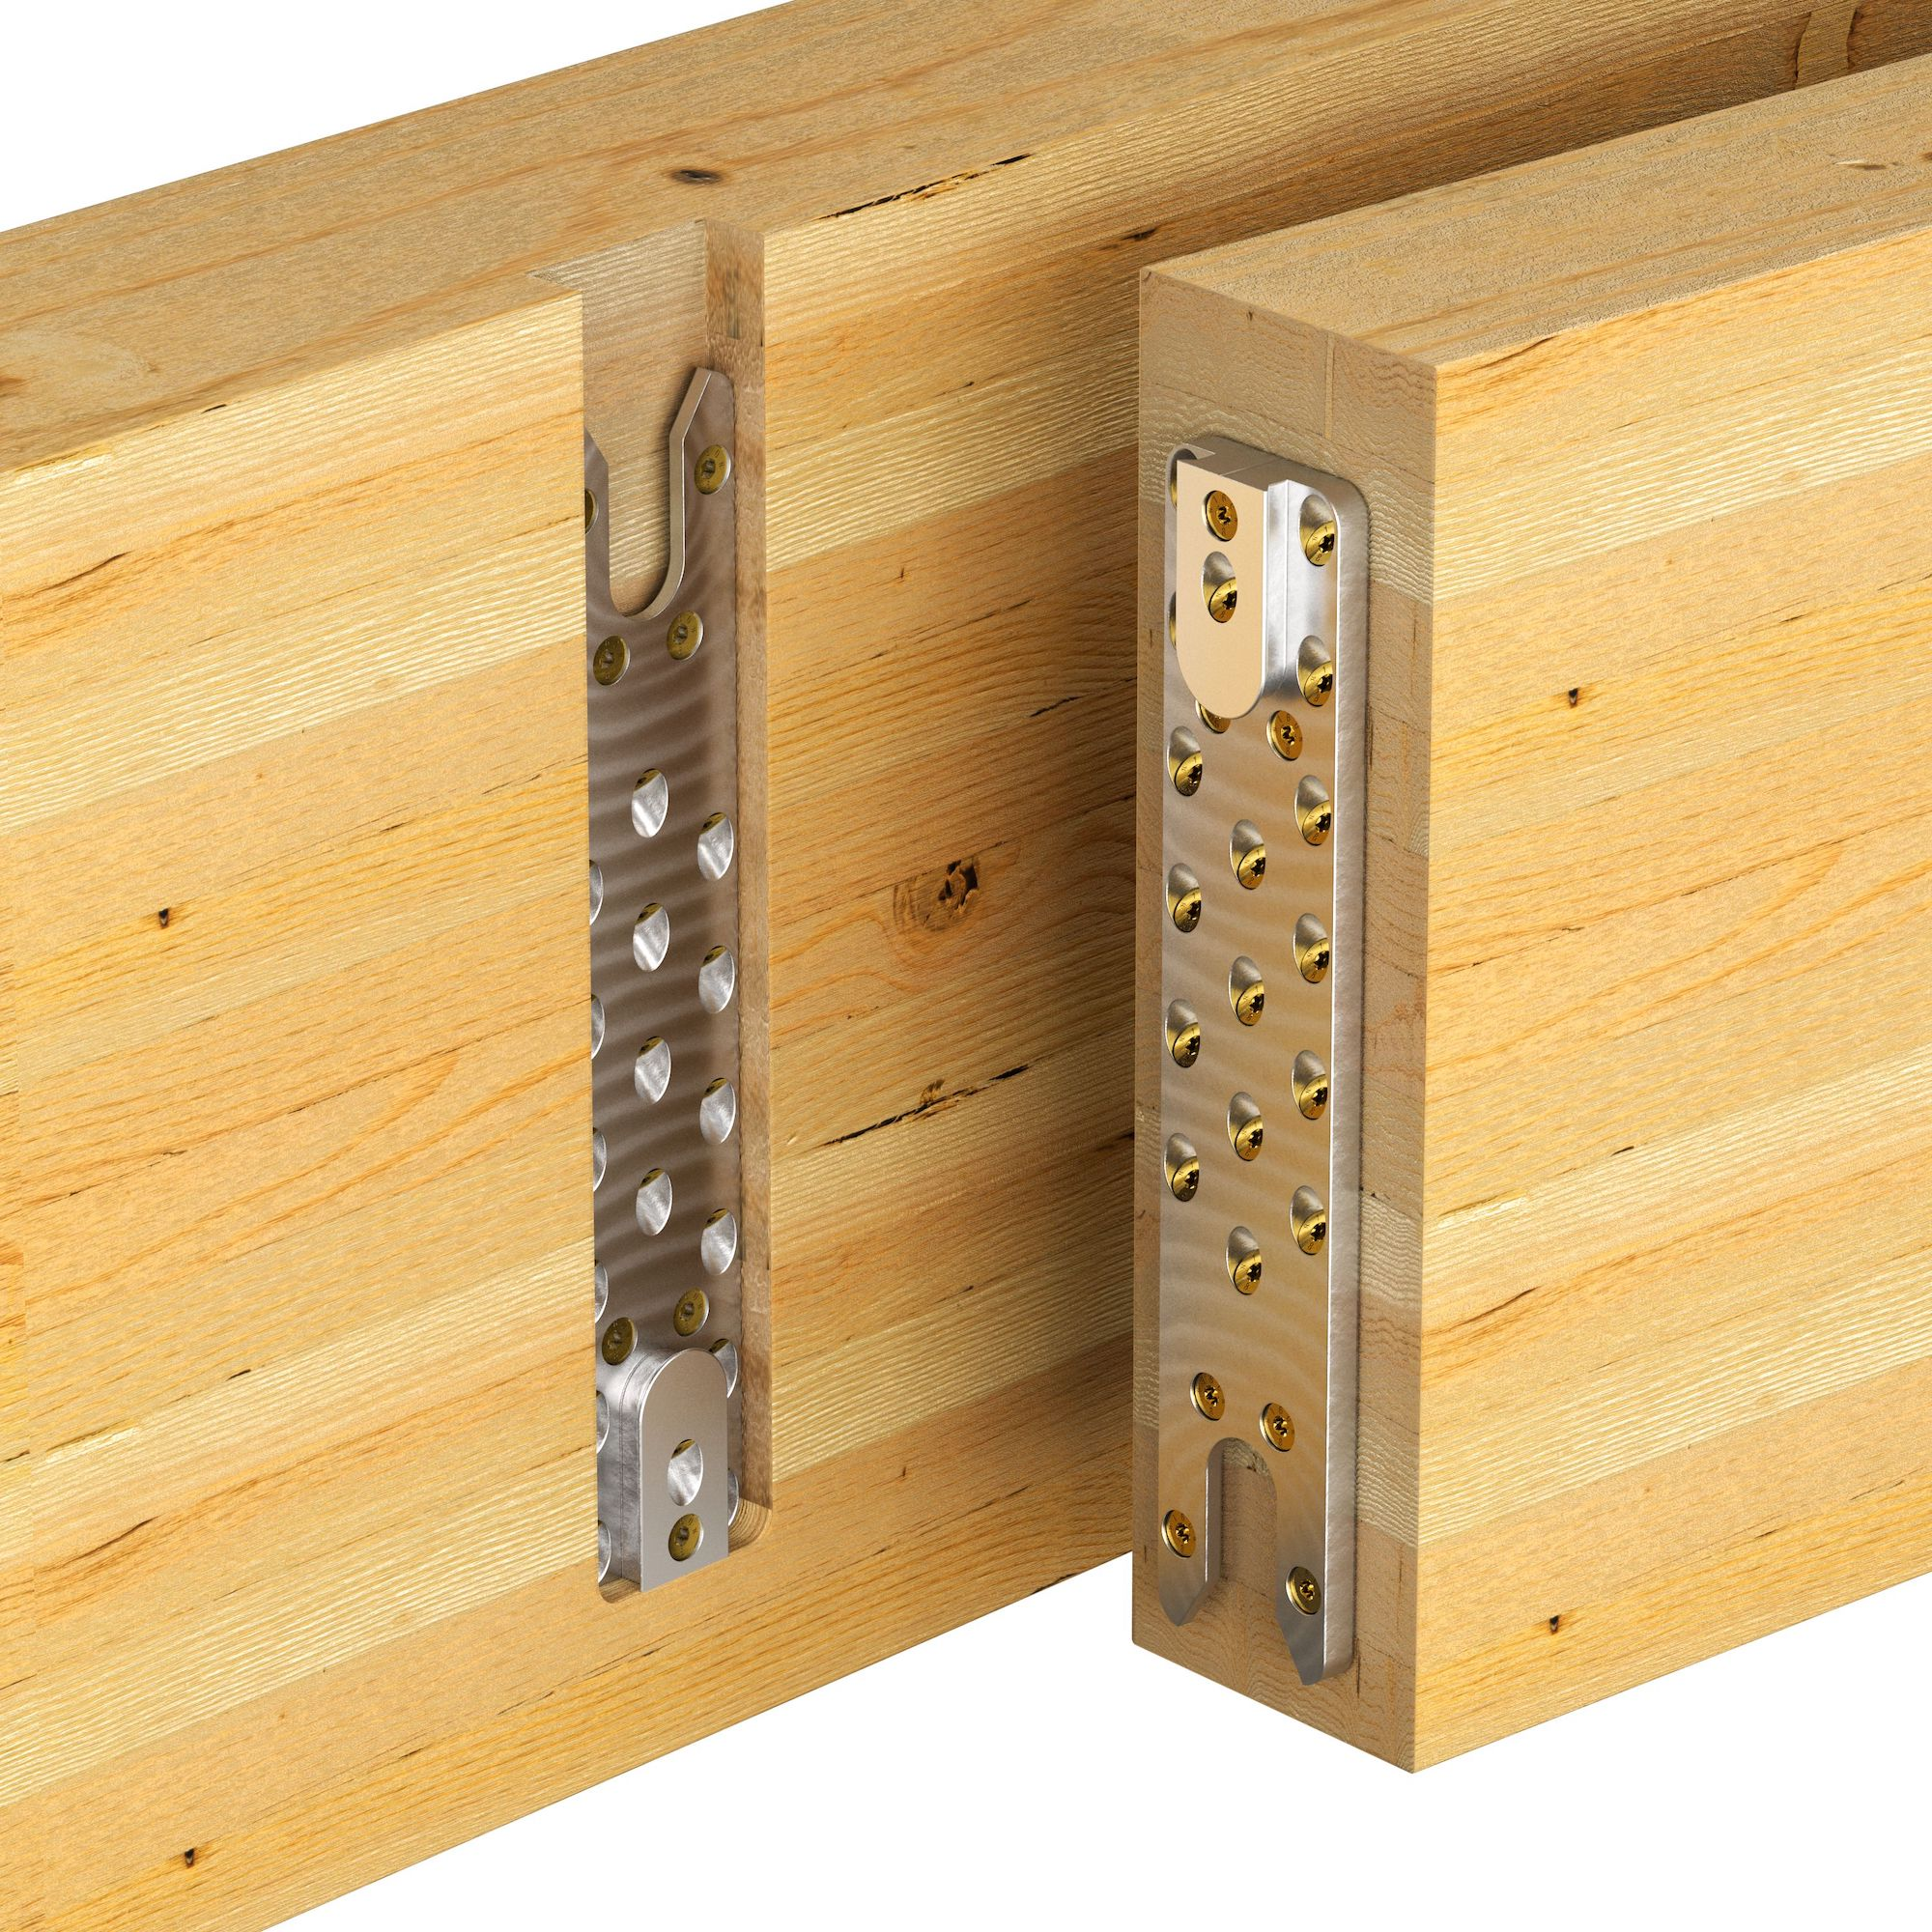 STRUCTURE magazine | Simpson Strong-Tie Introduces Aluminum Concealed Beam Hanger Designed to Take On Loads in Mass Timber Applications